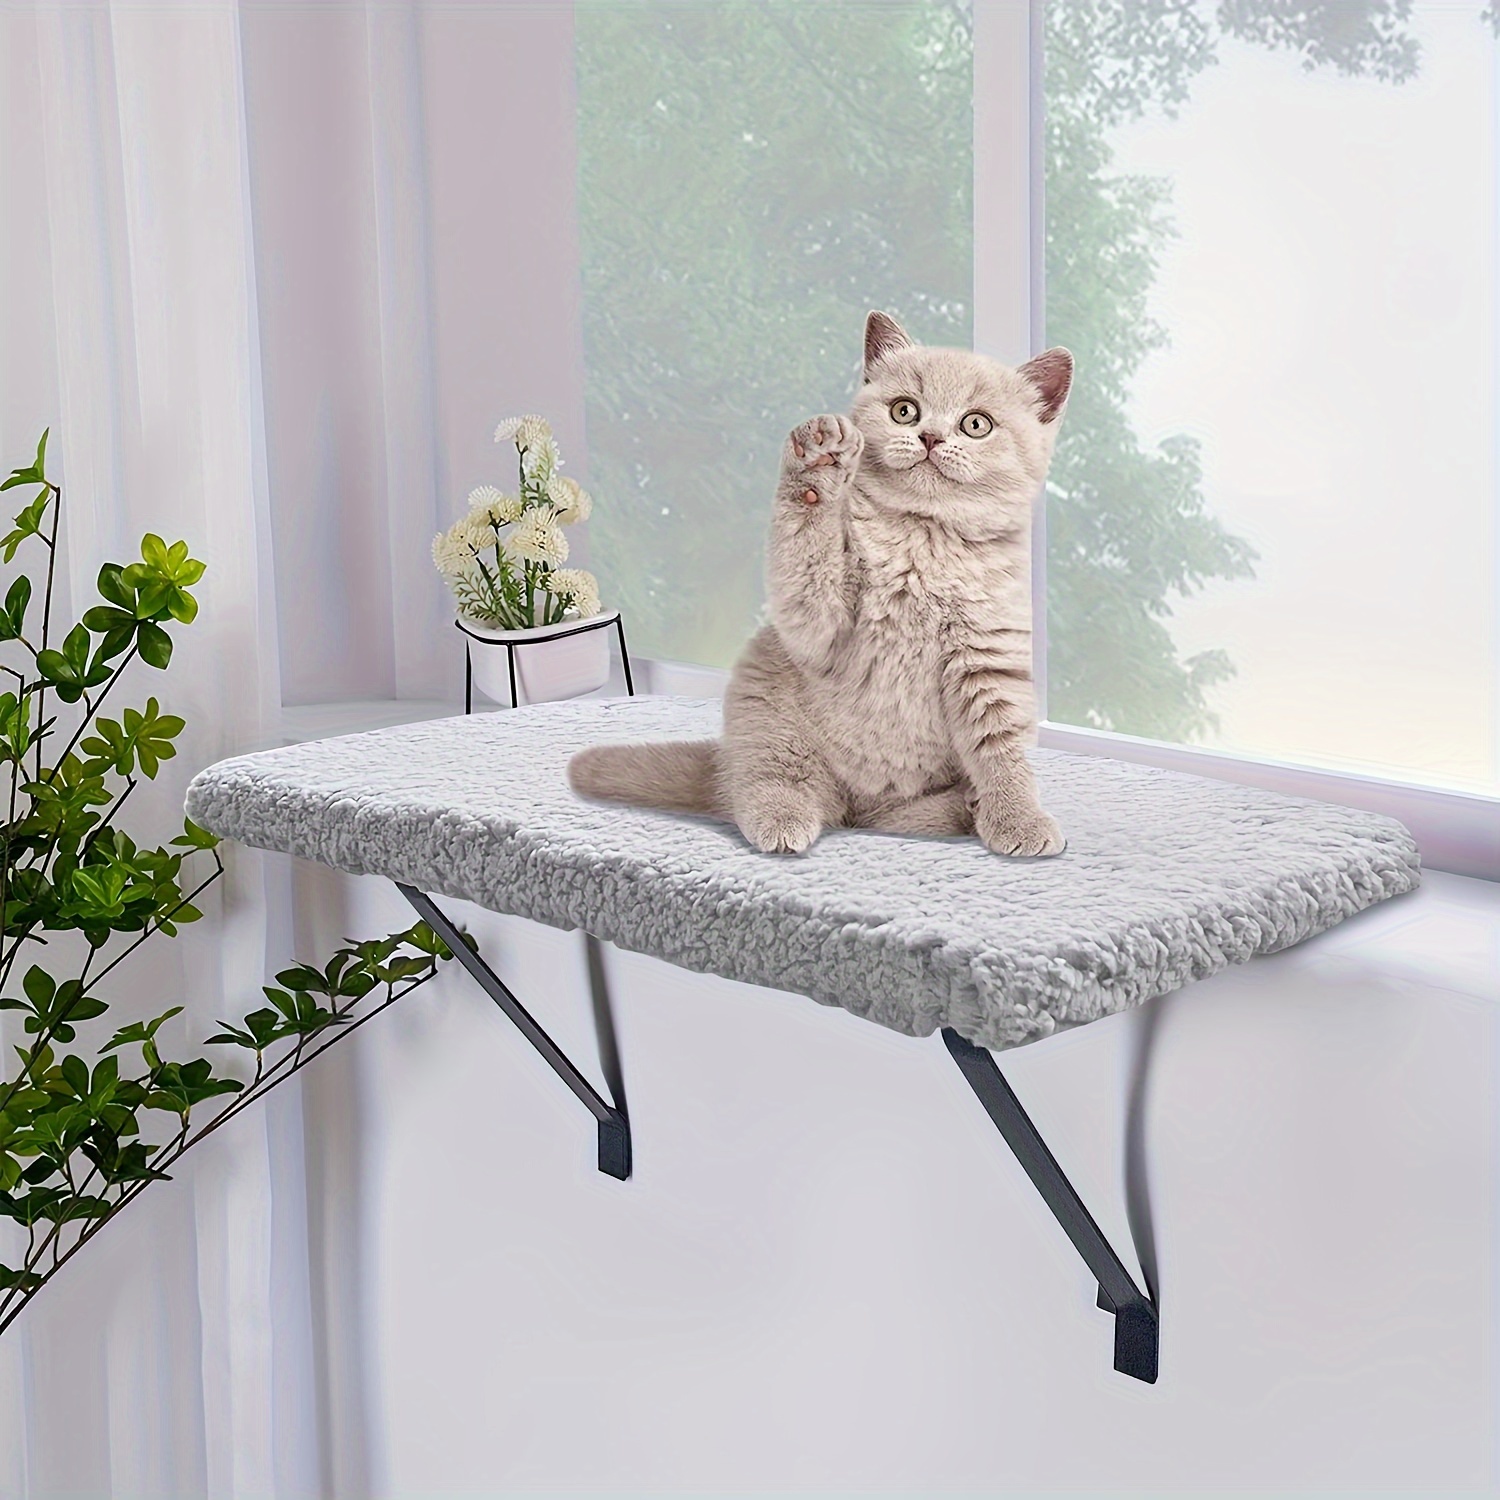 Cat Window Perch,Large Cat Sill Window Perch Lounge Mount Hammock Window Seat Bed for Indoor Cats,Dinosam Adjustable Cat Window Bed Cat Shelves for